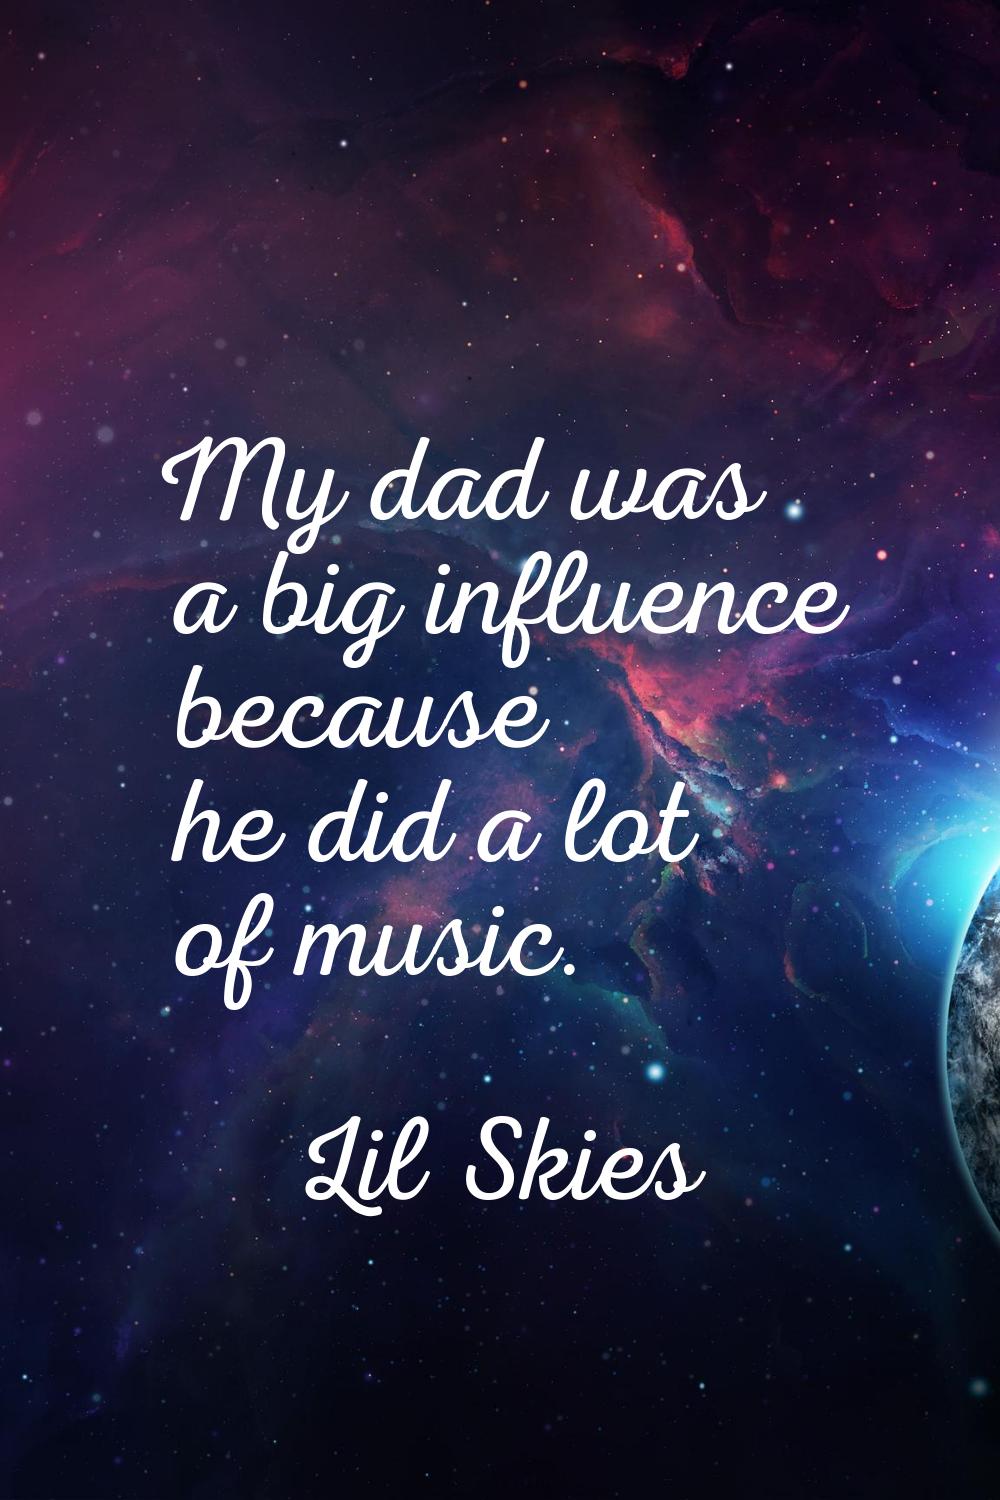 My dad was a big influence because he did a lot of music.